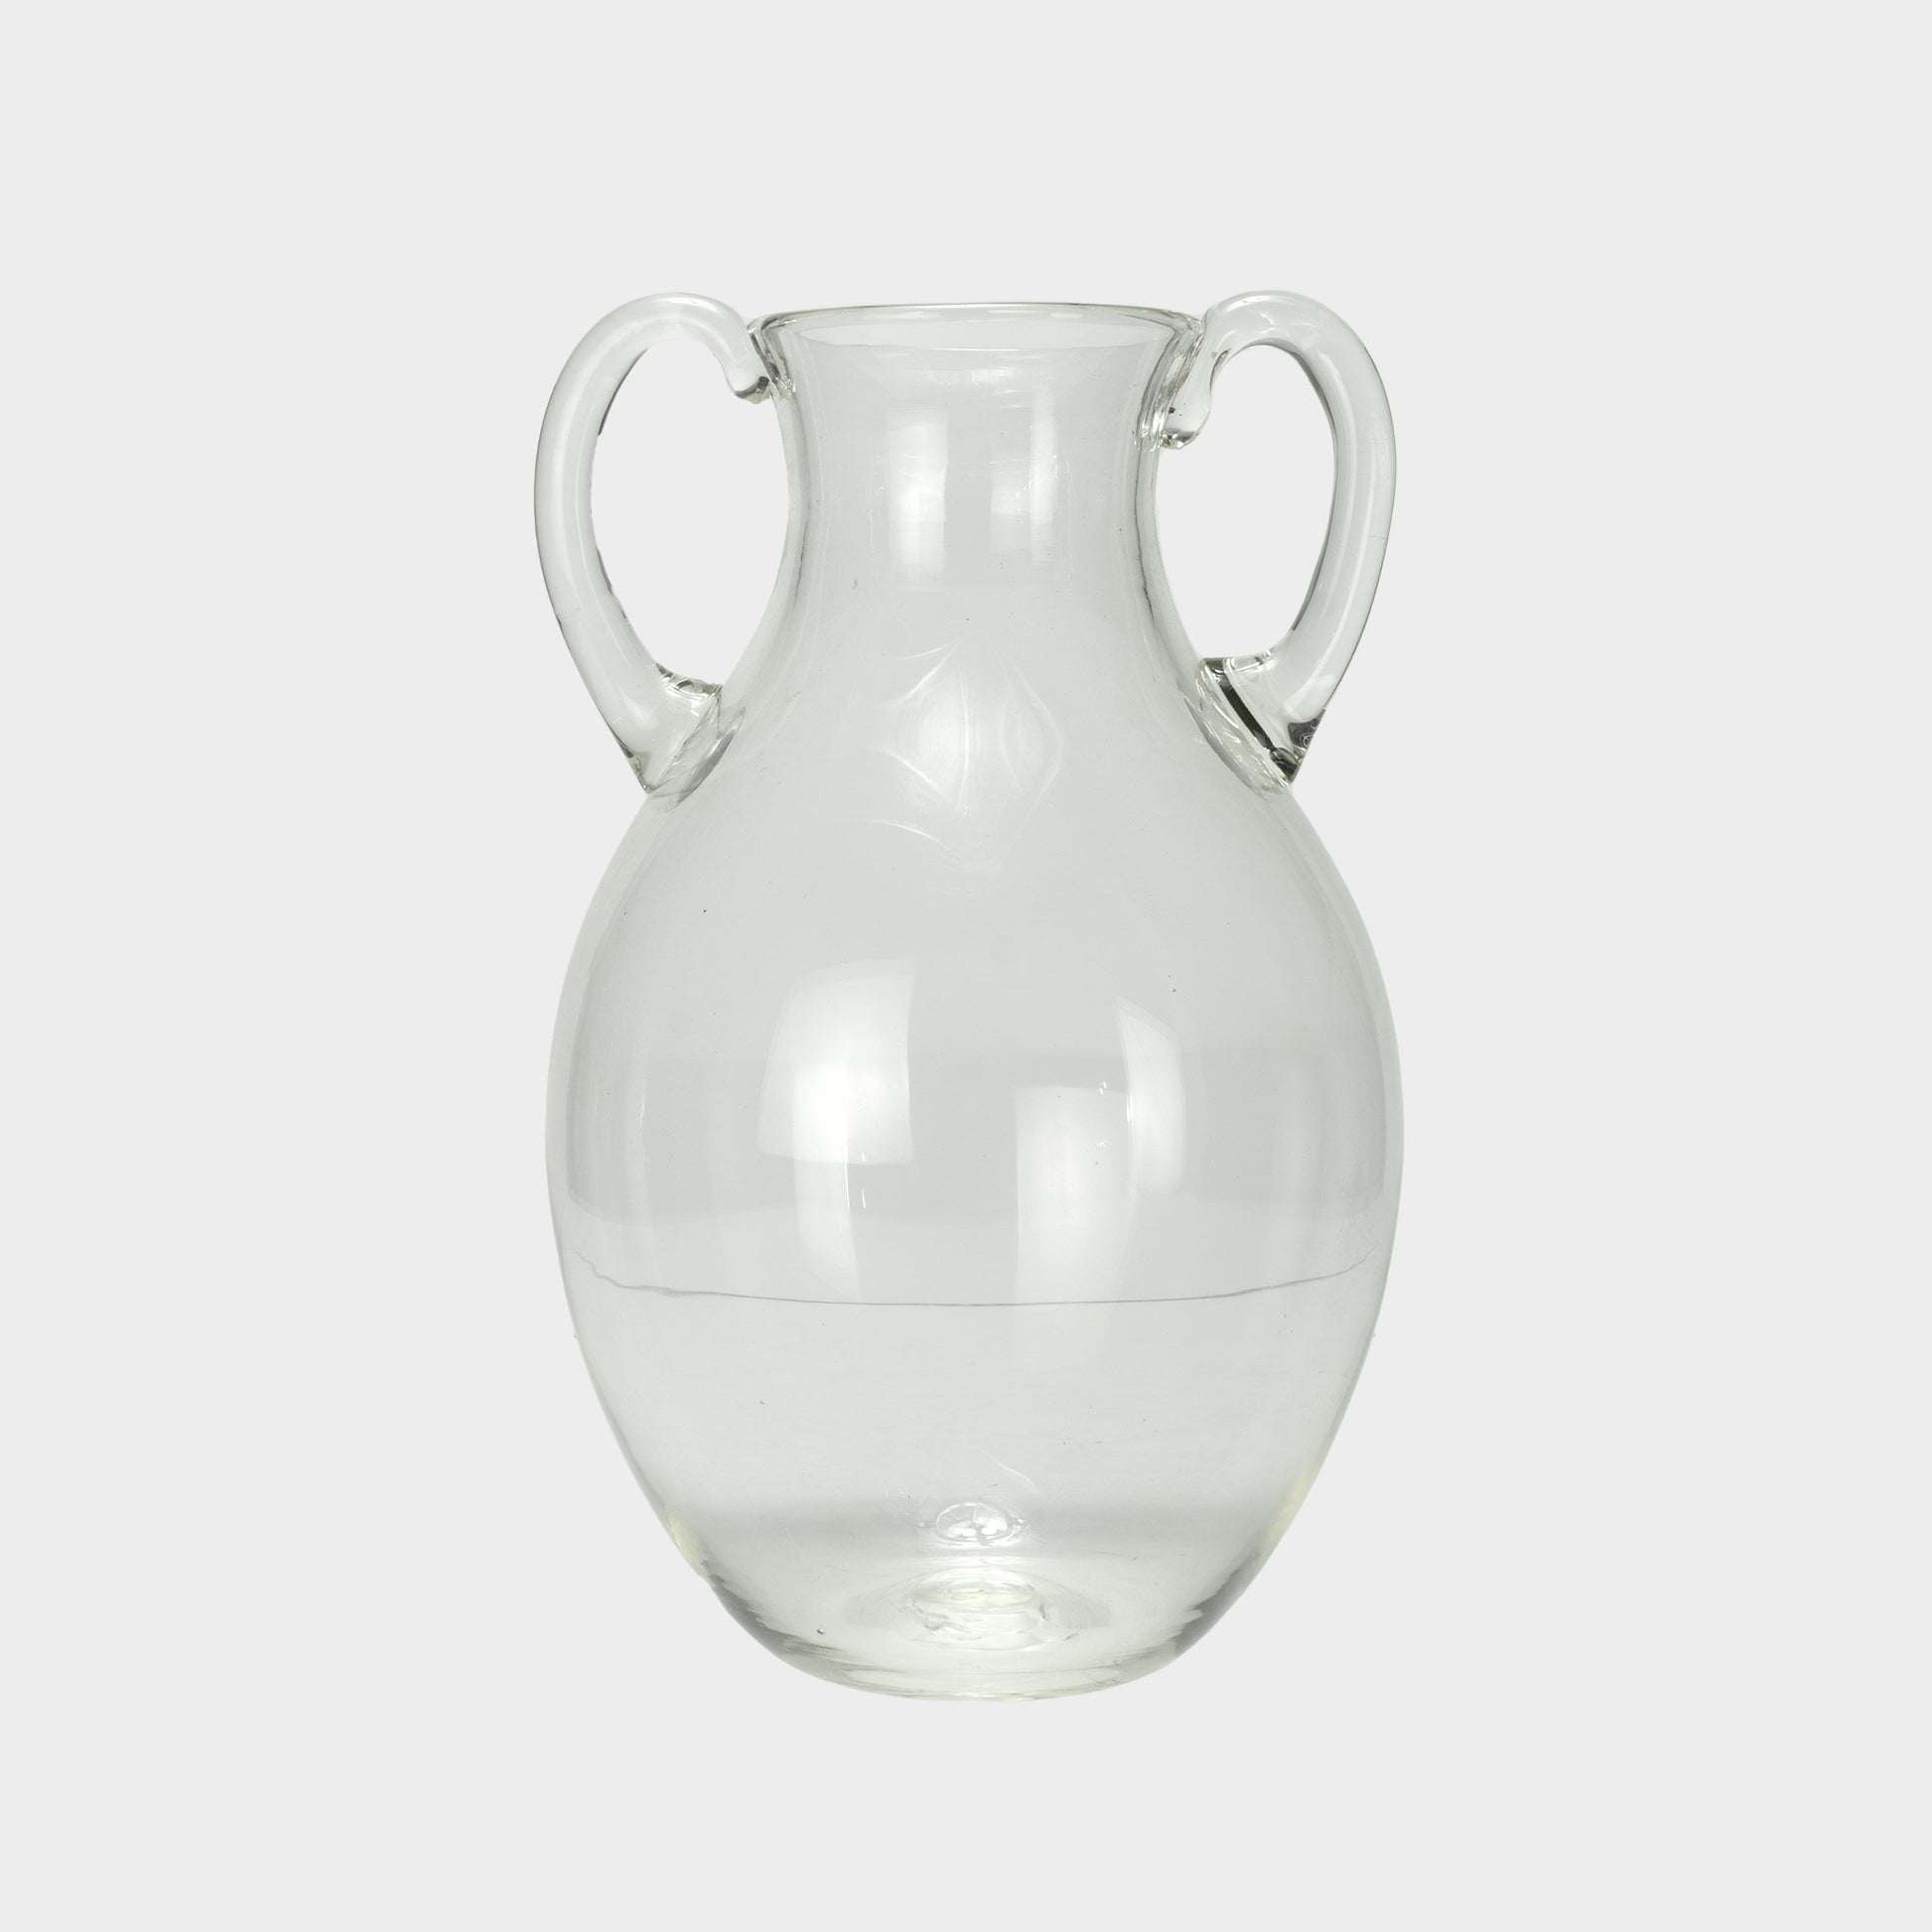 Mouth Blown Large Double Handled Vase